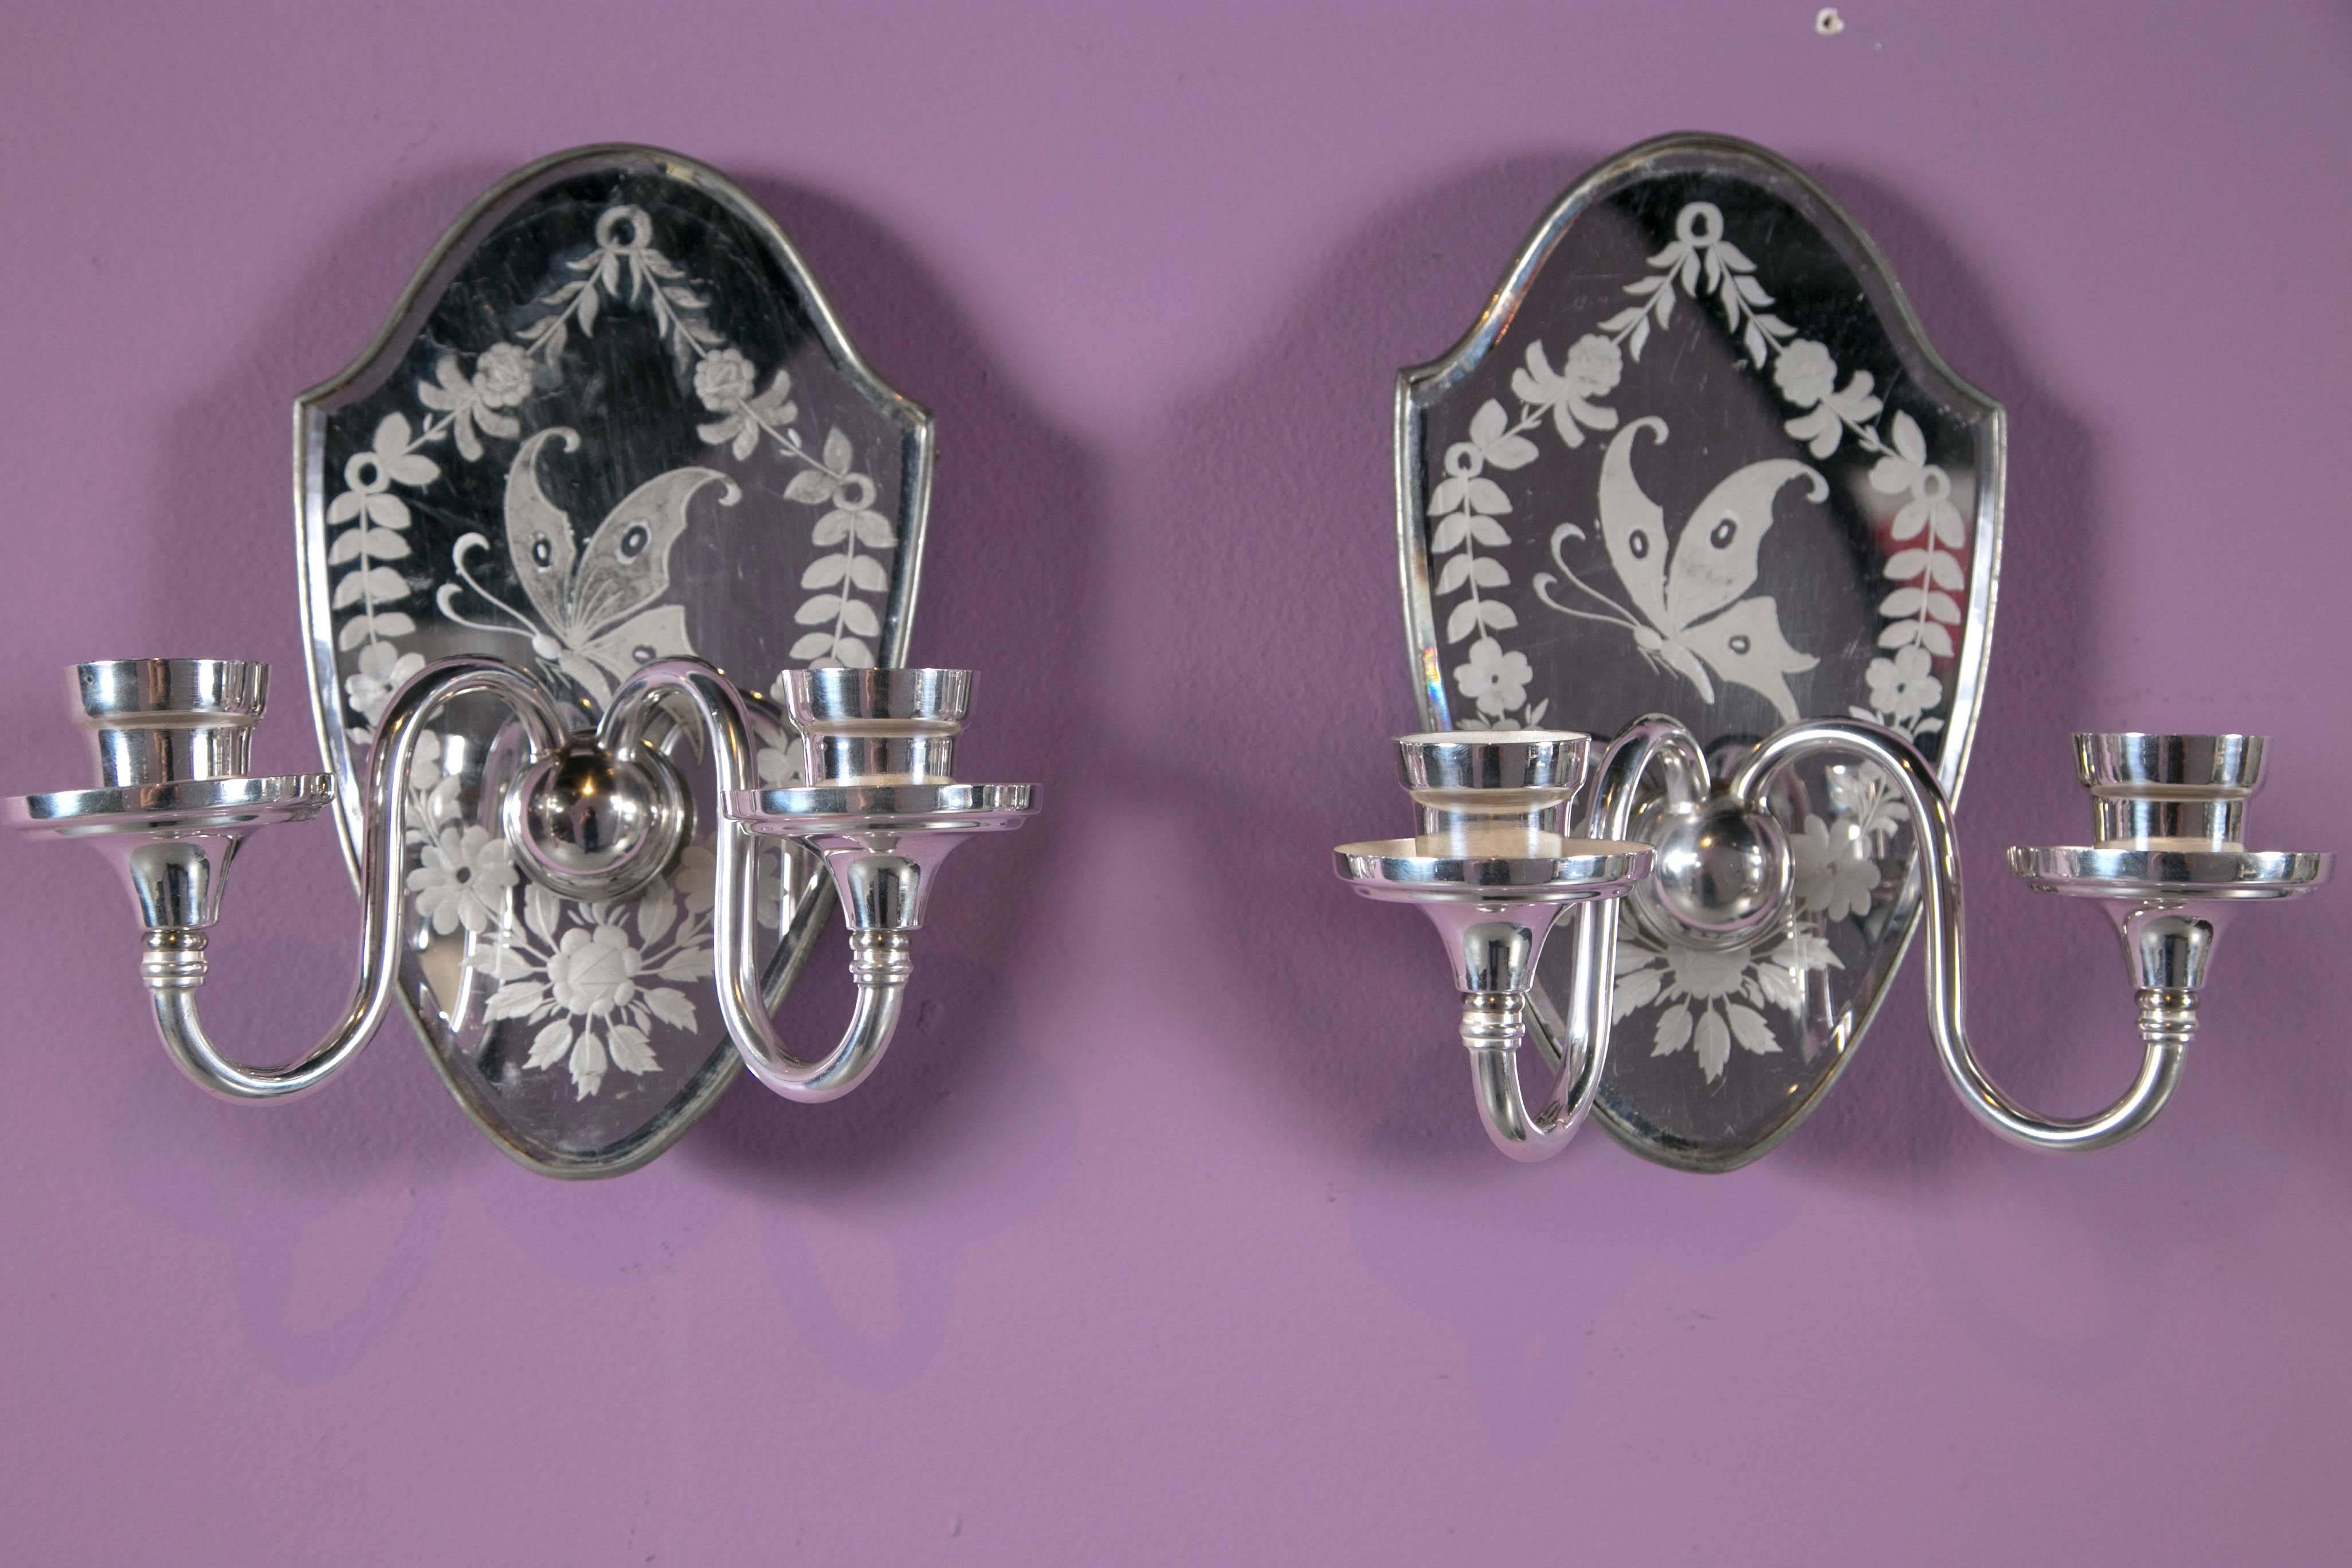 A lovely pair of silver plate and etched mirror Caldwell sconces garlands and butterflies make this a whimsical addition to your home.